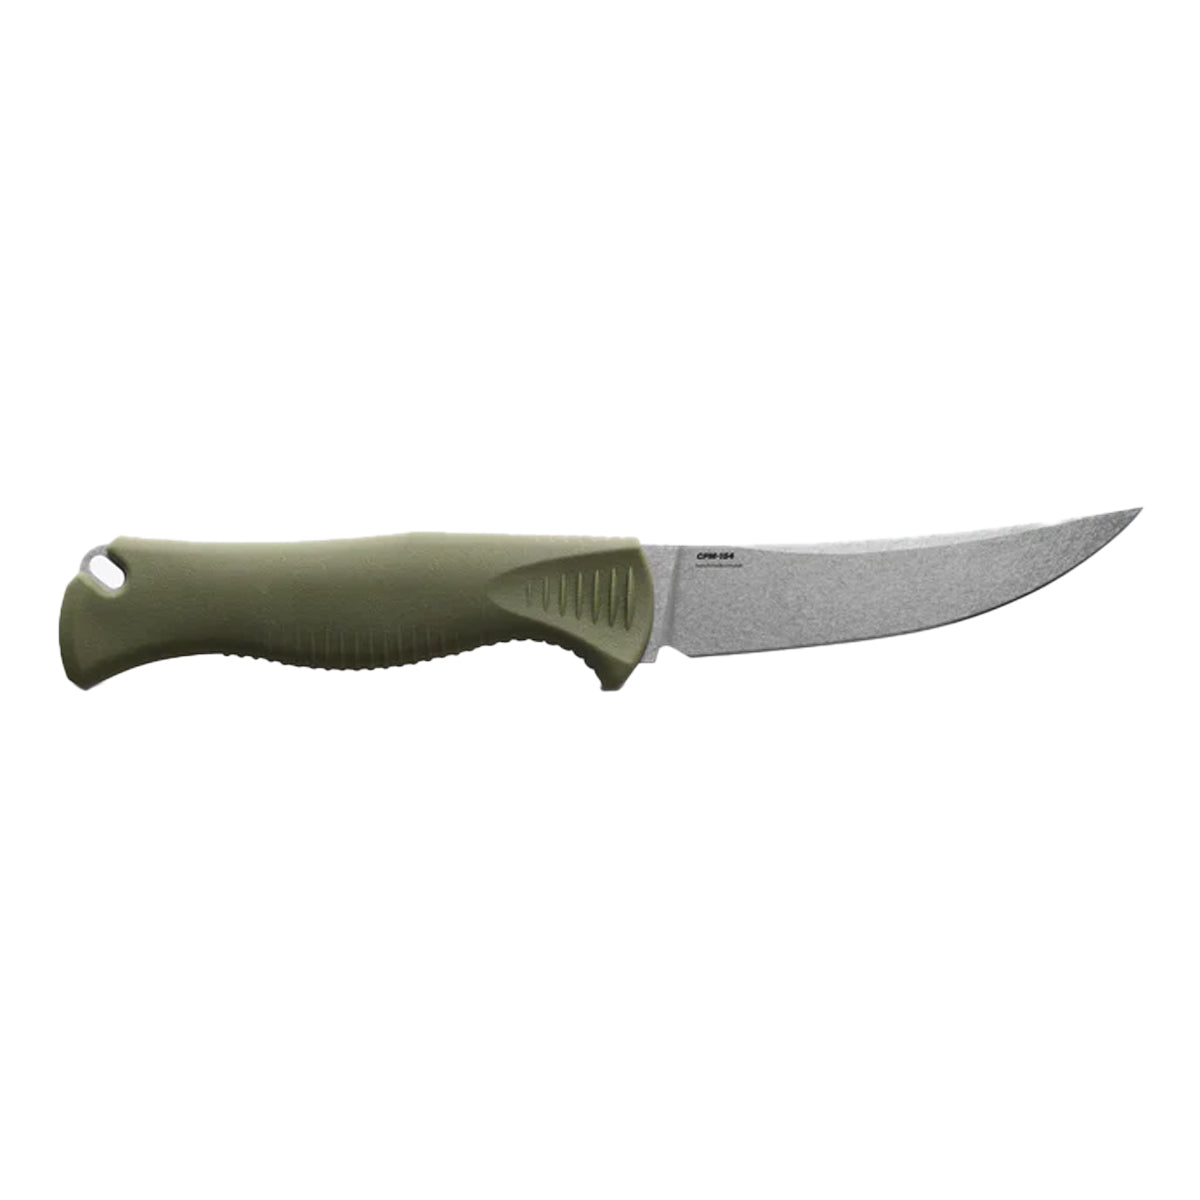 Benchmade Meatcrafter 15505 in  by GOHUNT | Benchmade - GOHUNT Shop